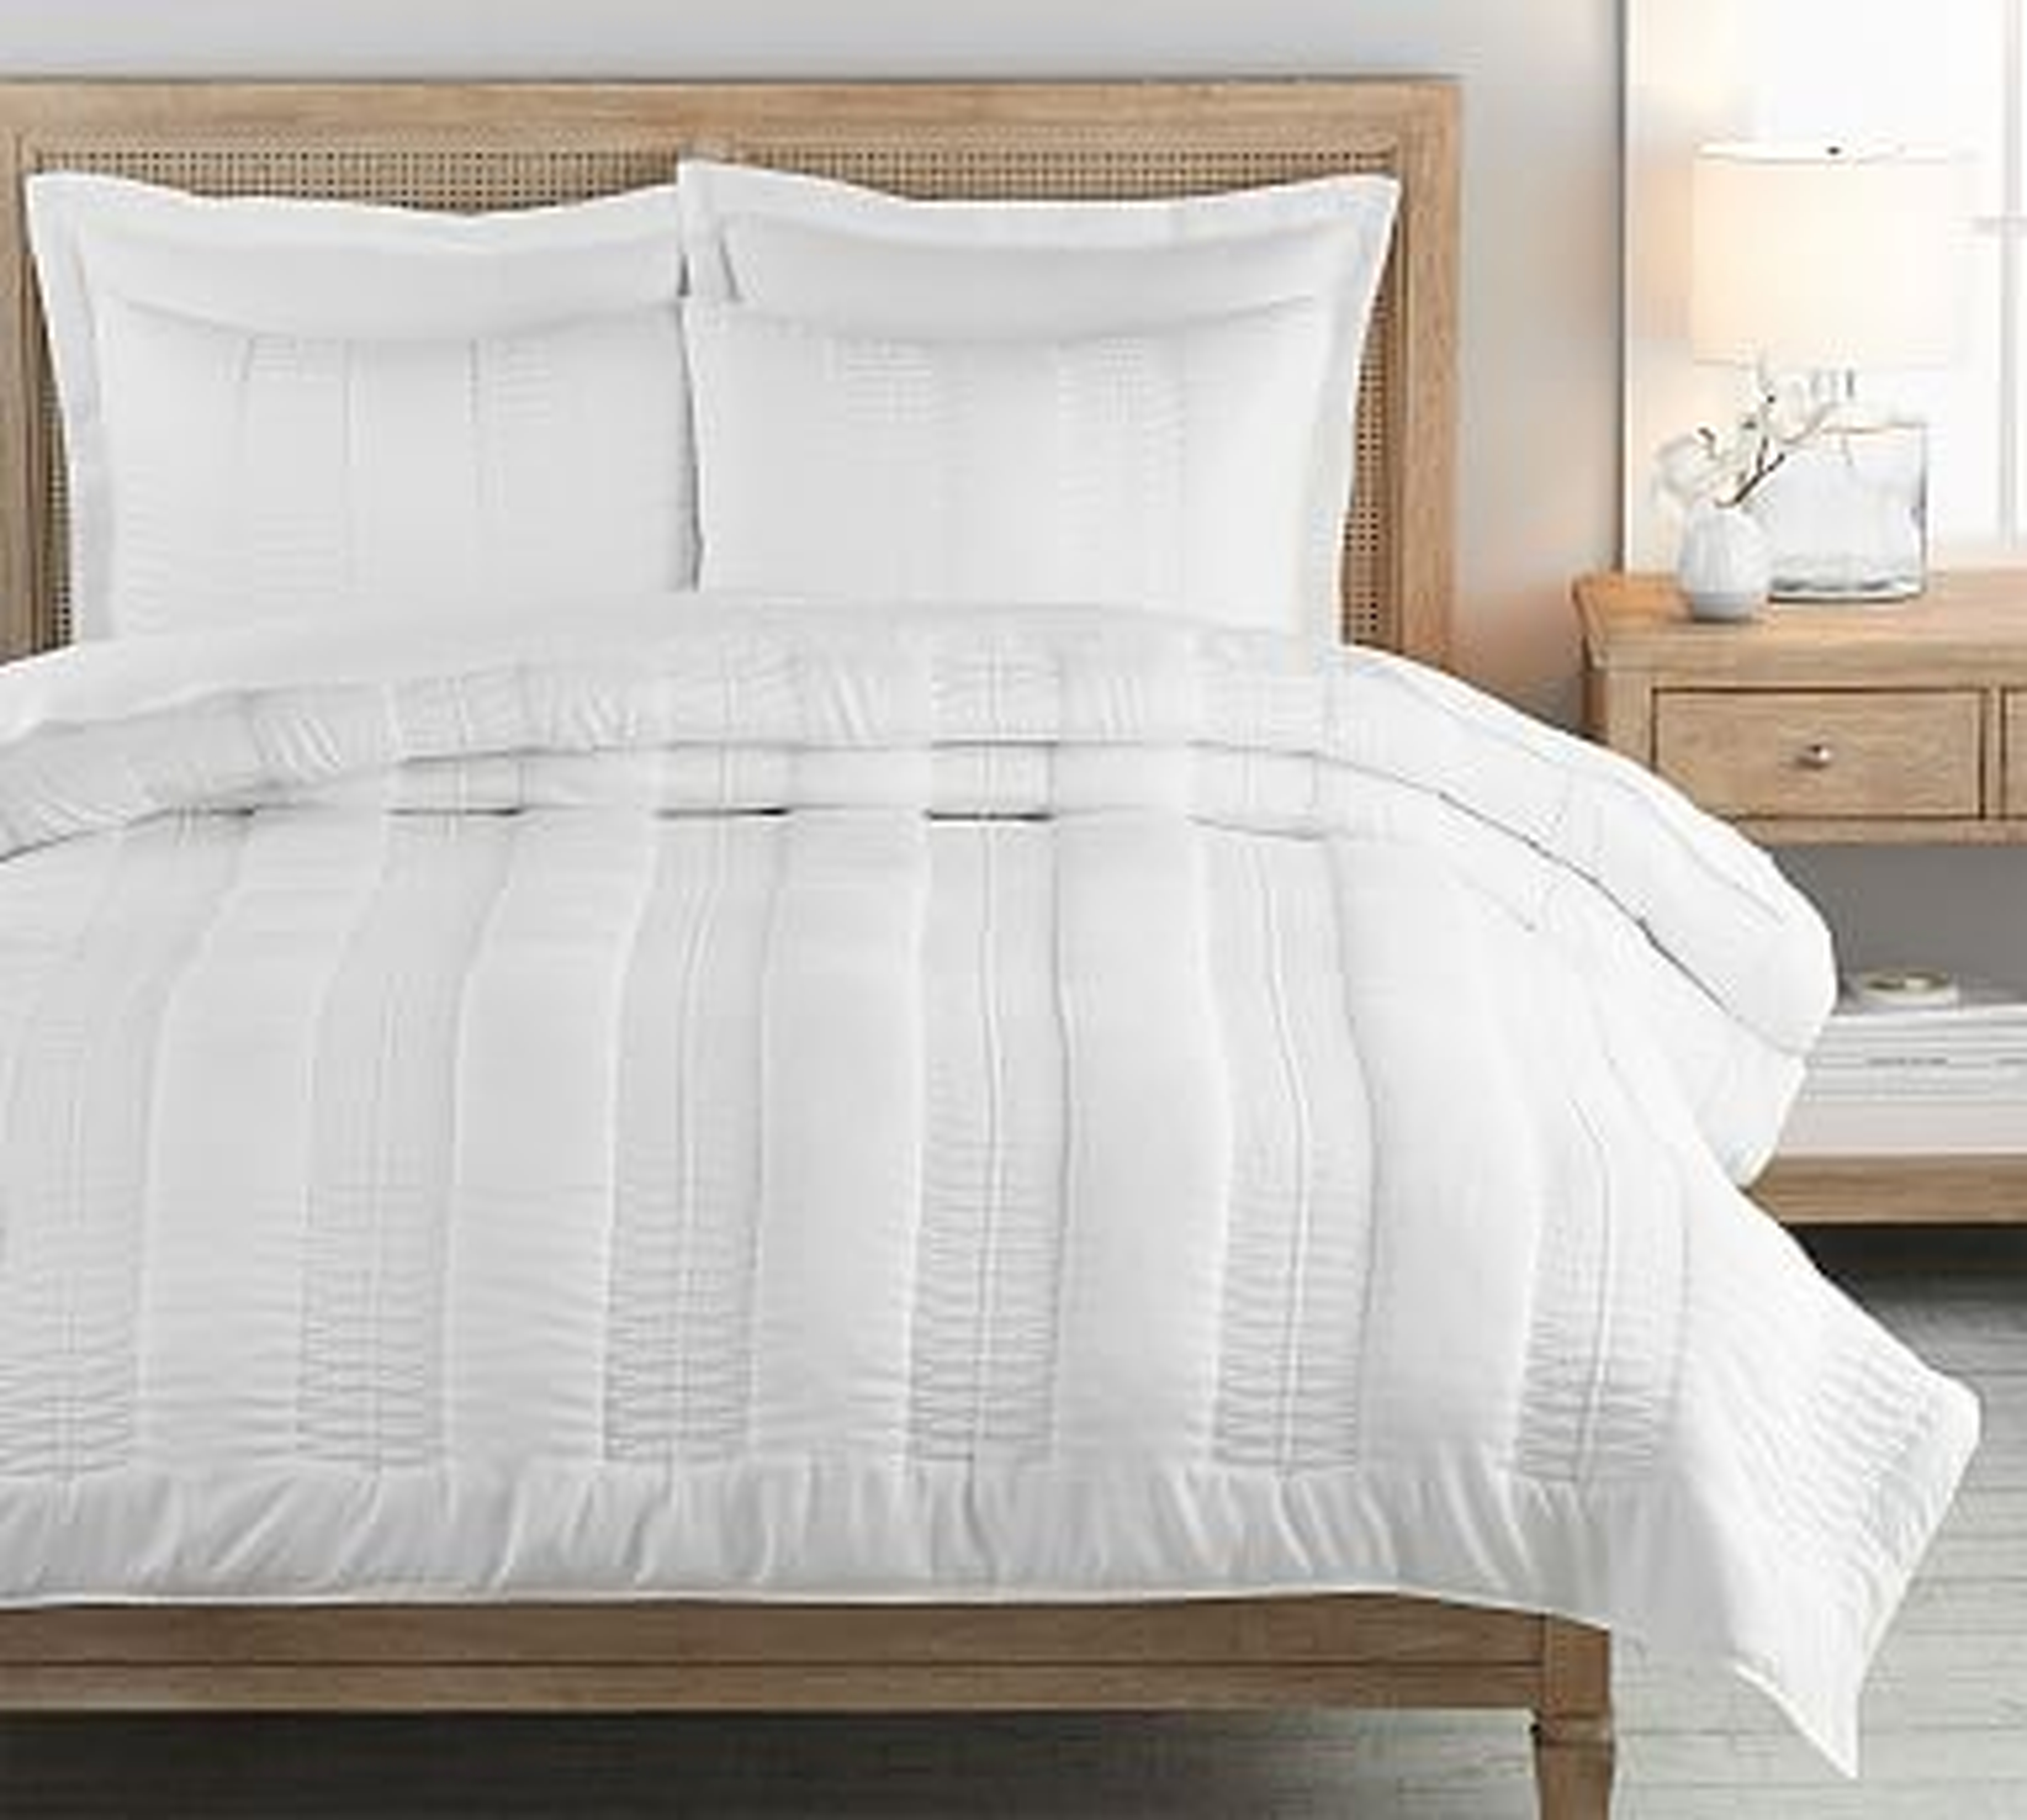 Washed TENCEL(TM) Quilt, King/Cal King, White - Pottery Barn